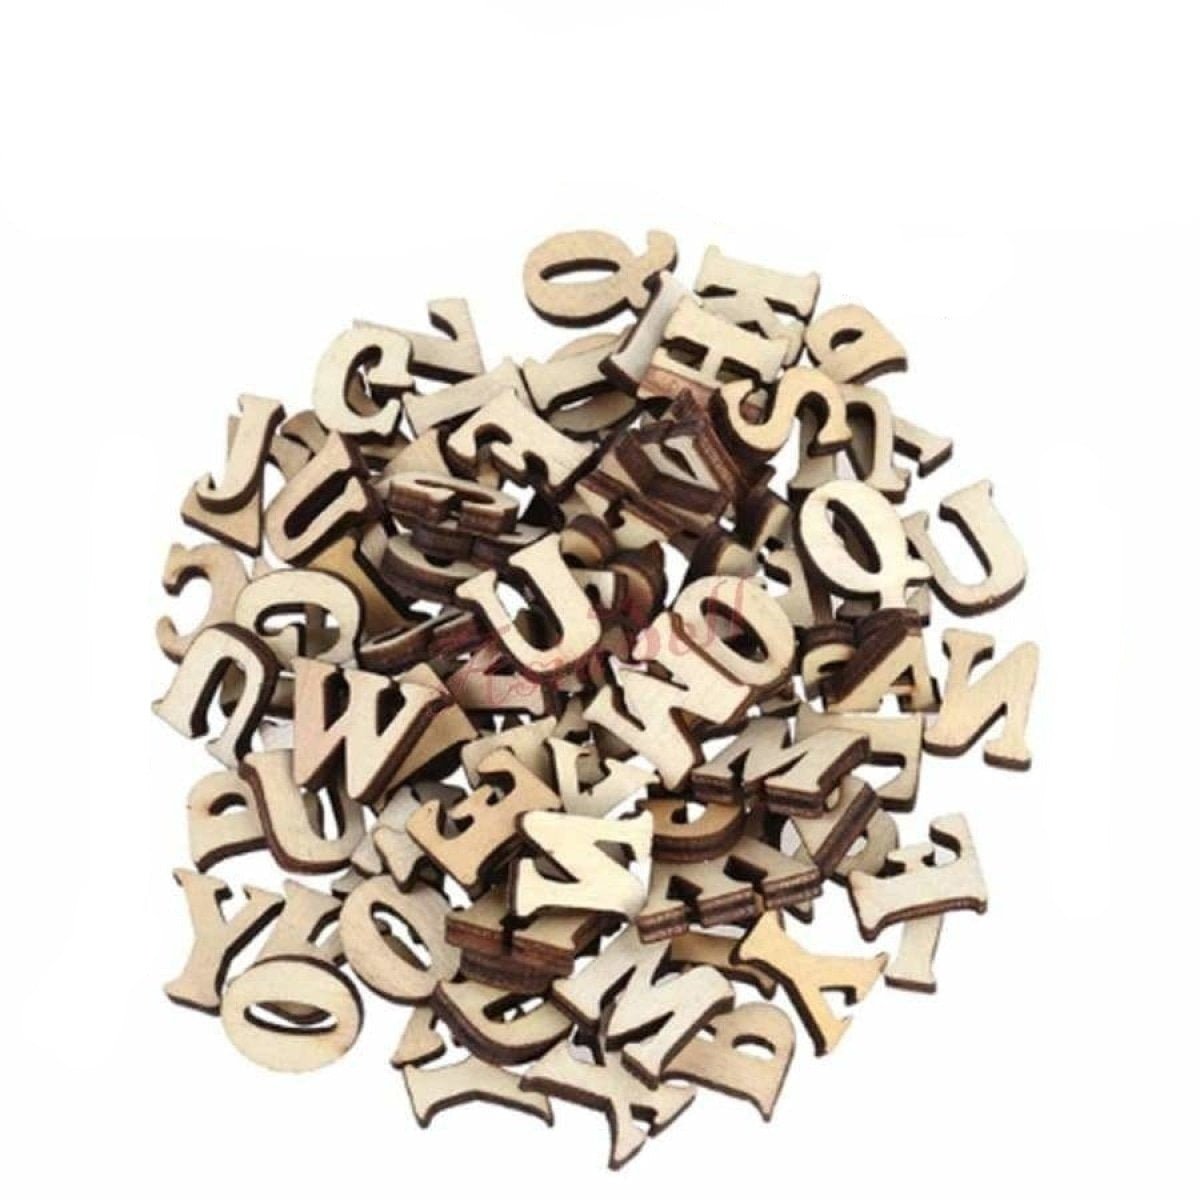 100pcs Wooden Letters 15mm High Alphabet Art DIY Craft Wood Lettering - Asia Sell